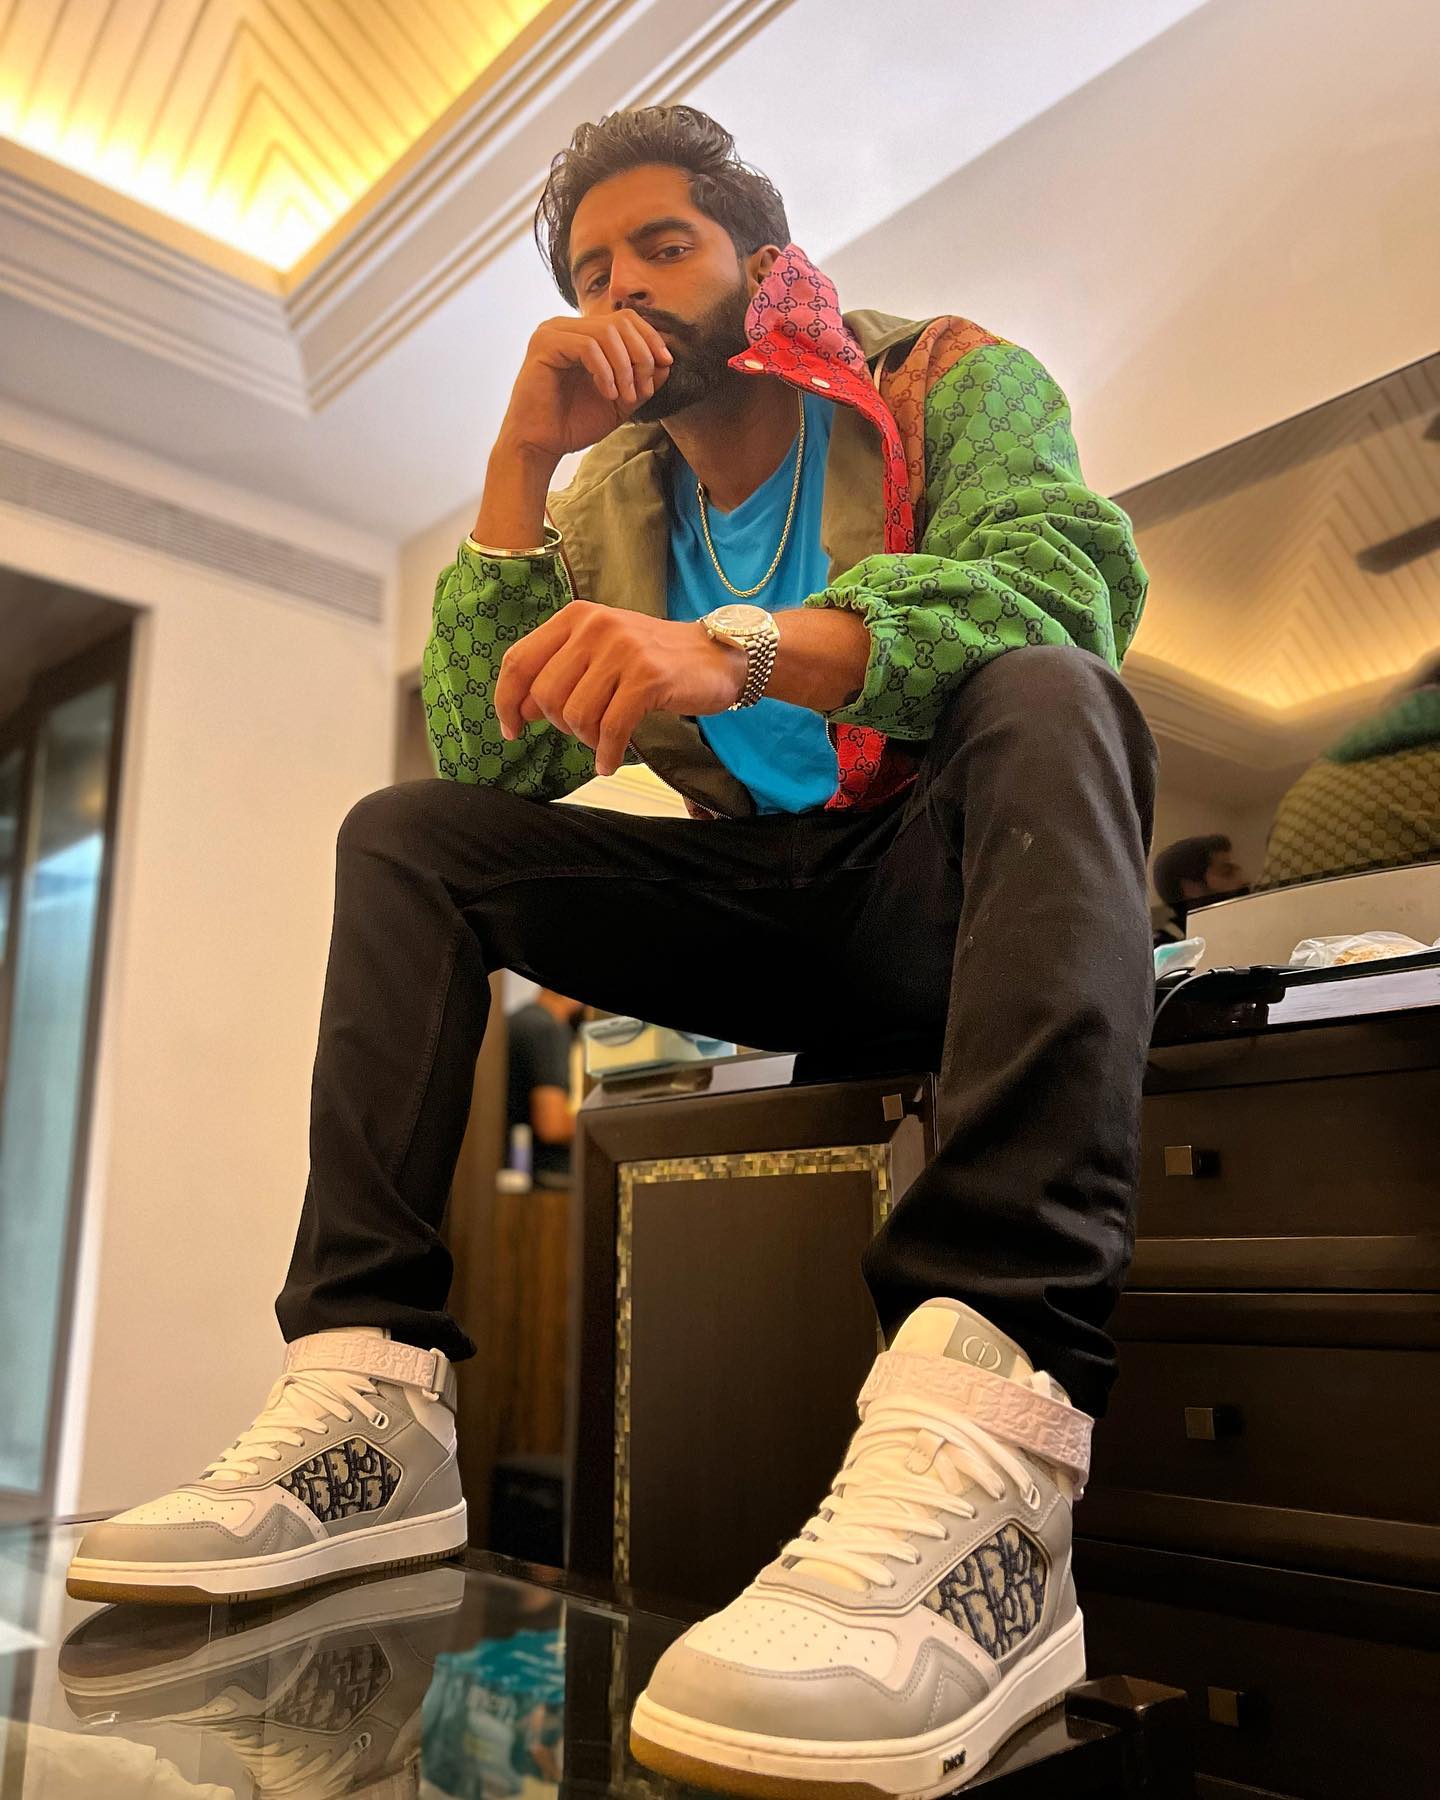 Exclusive! Parmish Verma: 'Everything About Punjab Is So Amazing That It Just Engulfs You In That Cinematic Experience'